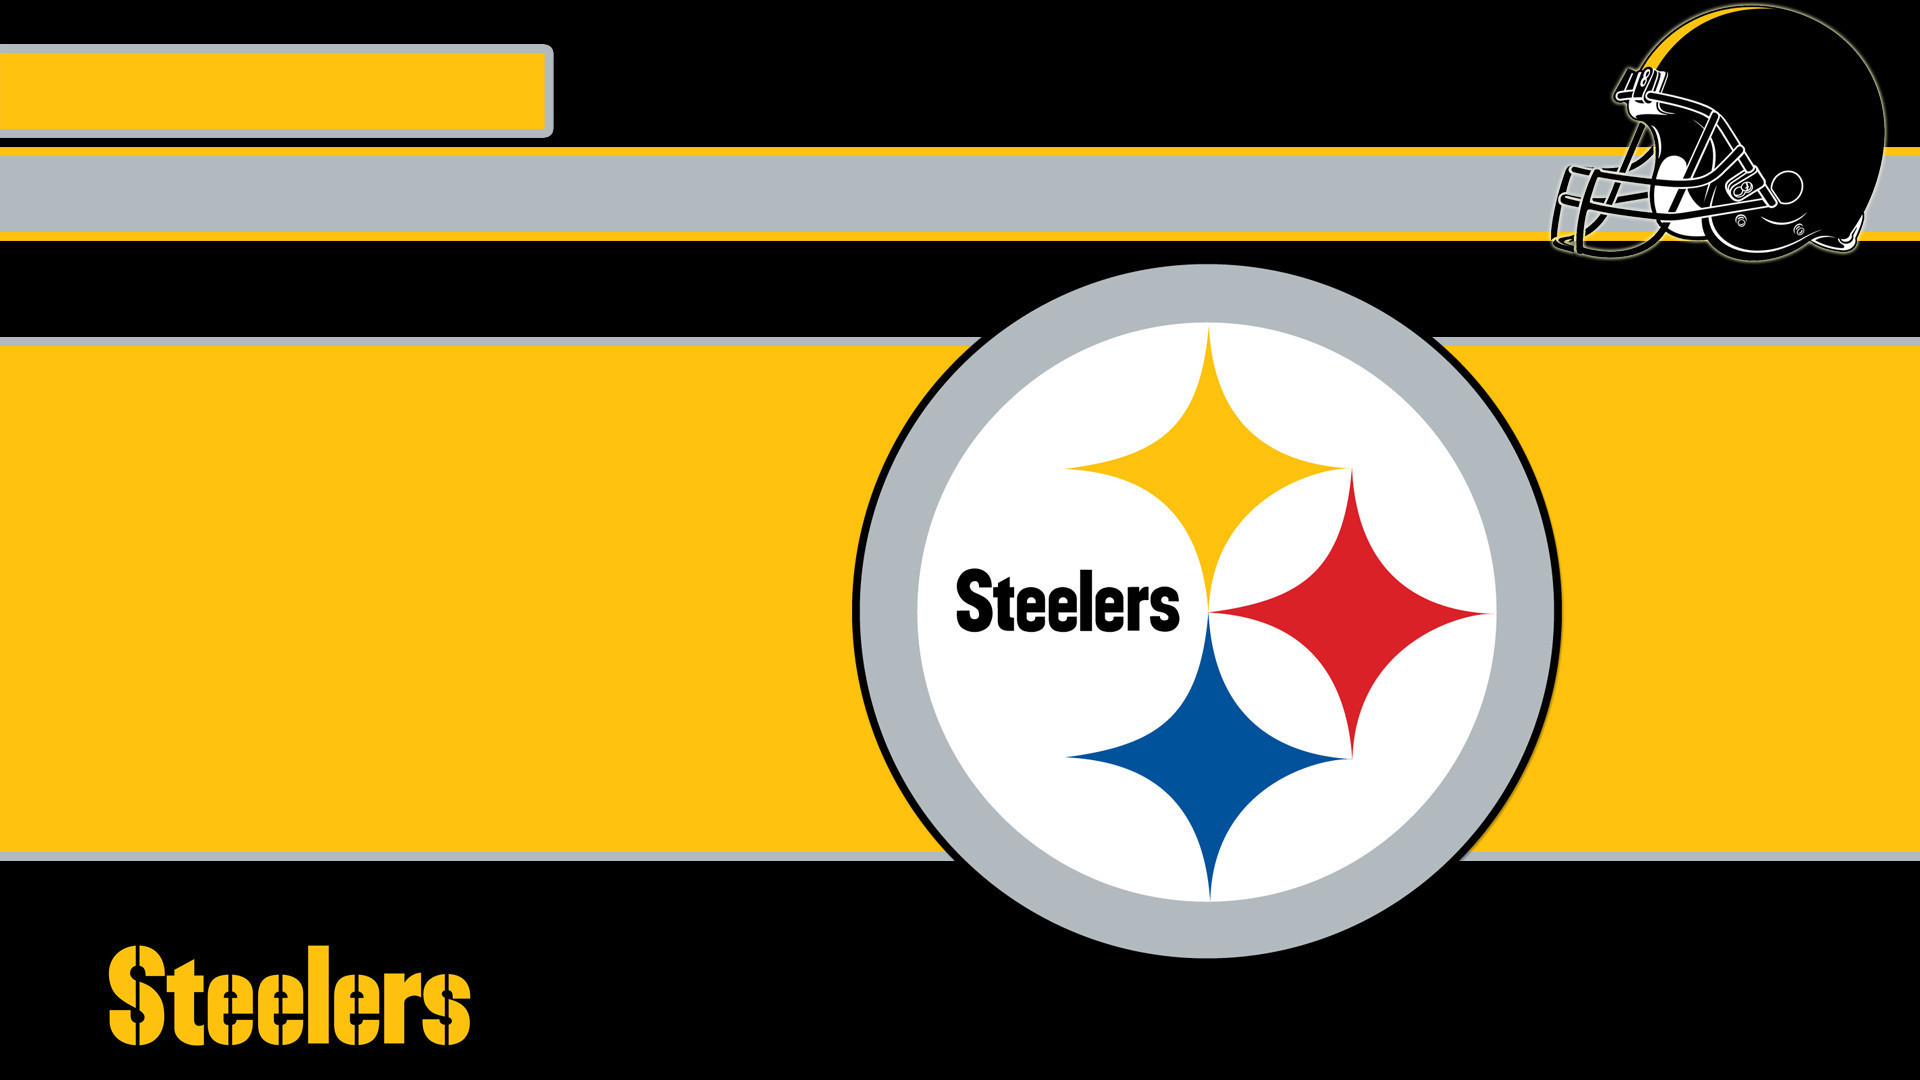 1920x1080  2648x1698 Pittsburgh Steelers Wallpapers PC iPhone Android Â·  Download Â· 1920x1200 ...